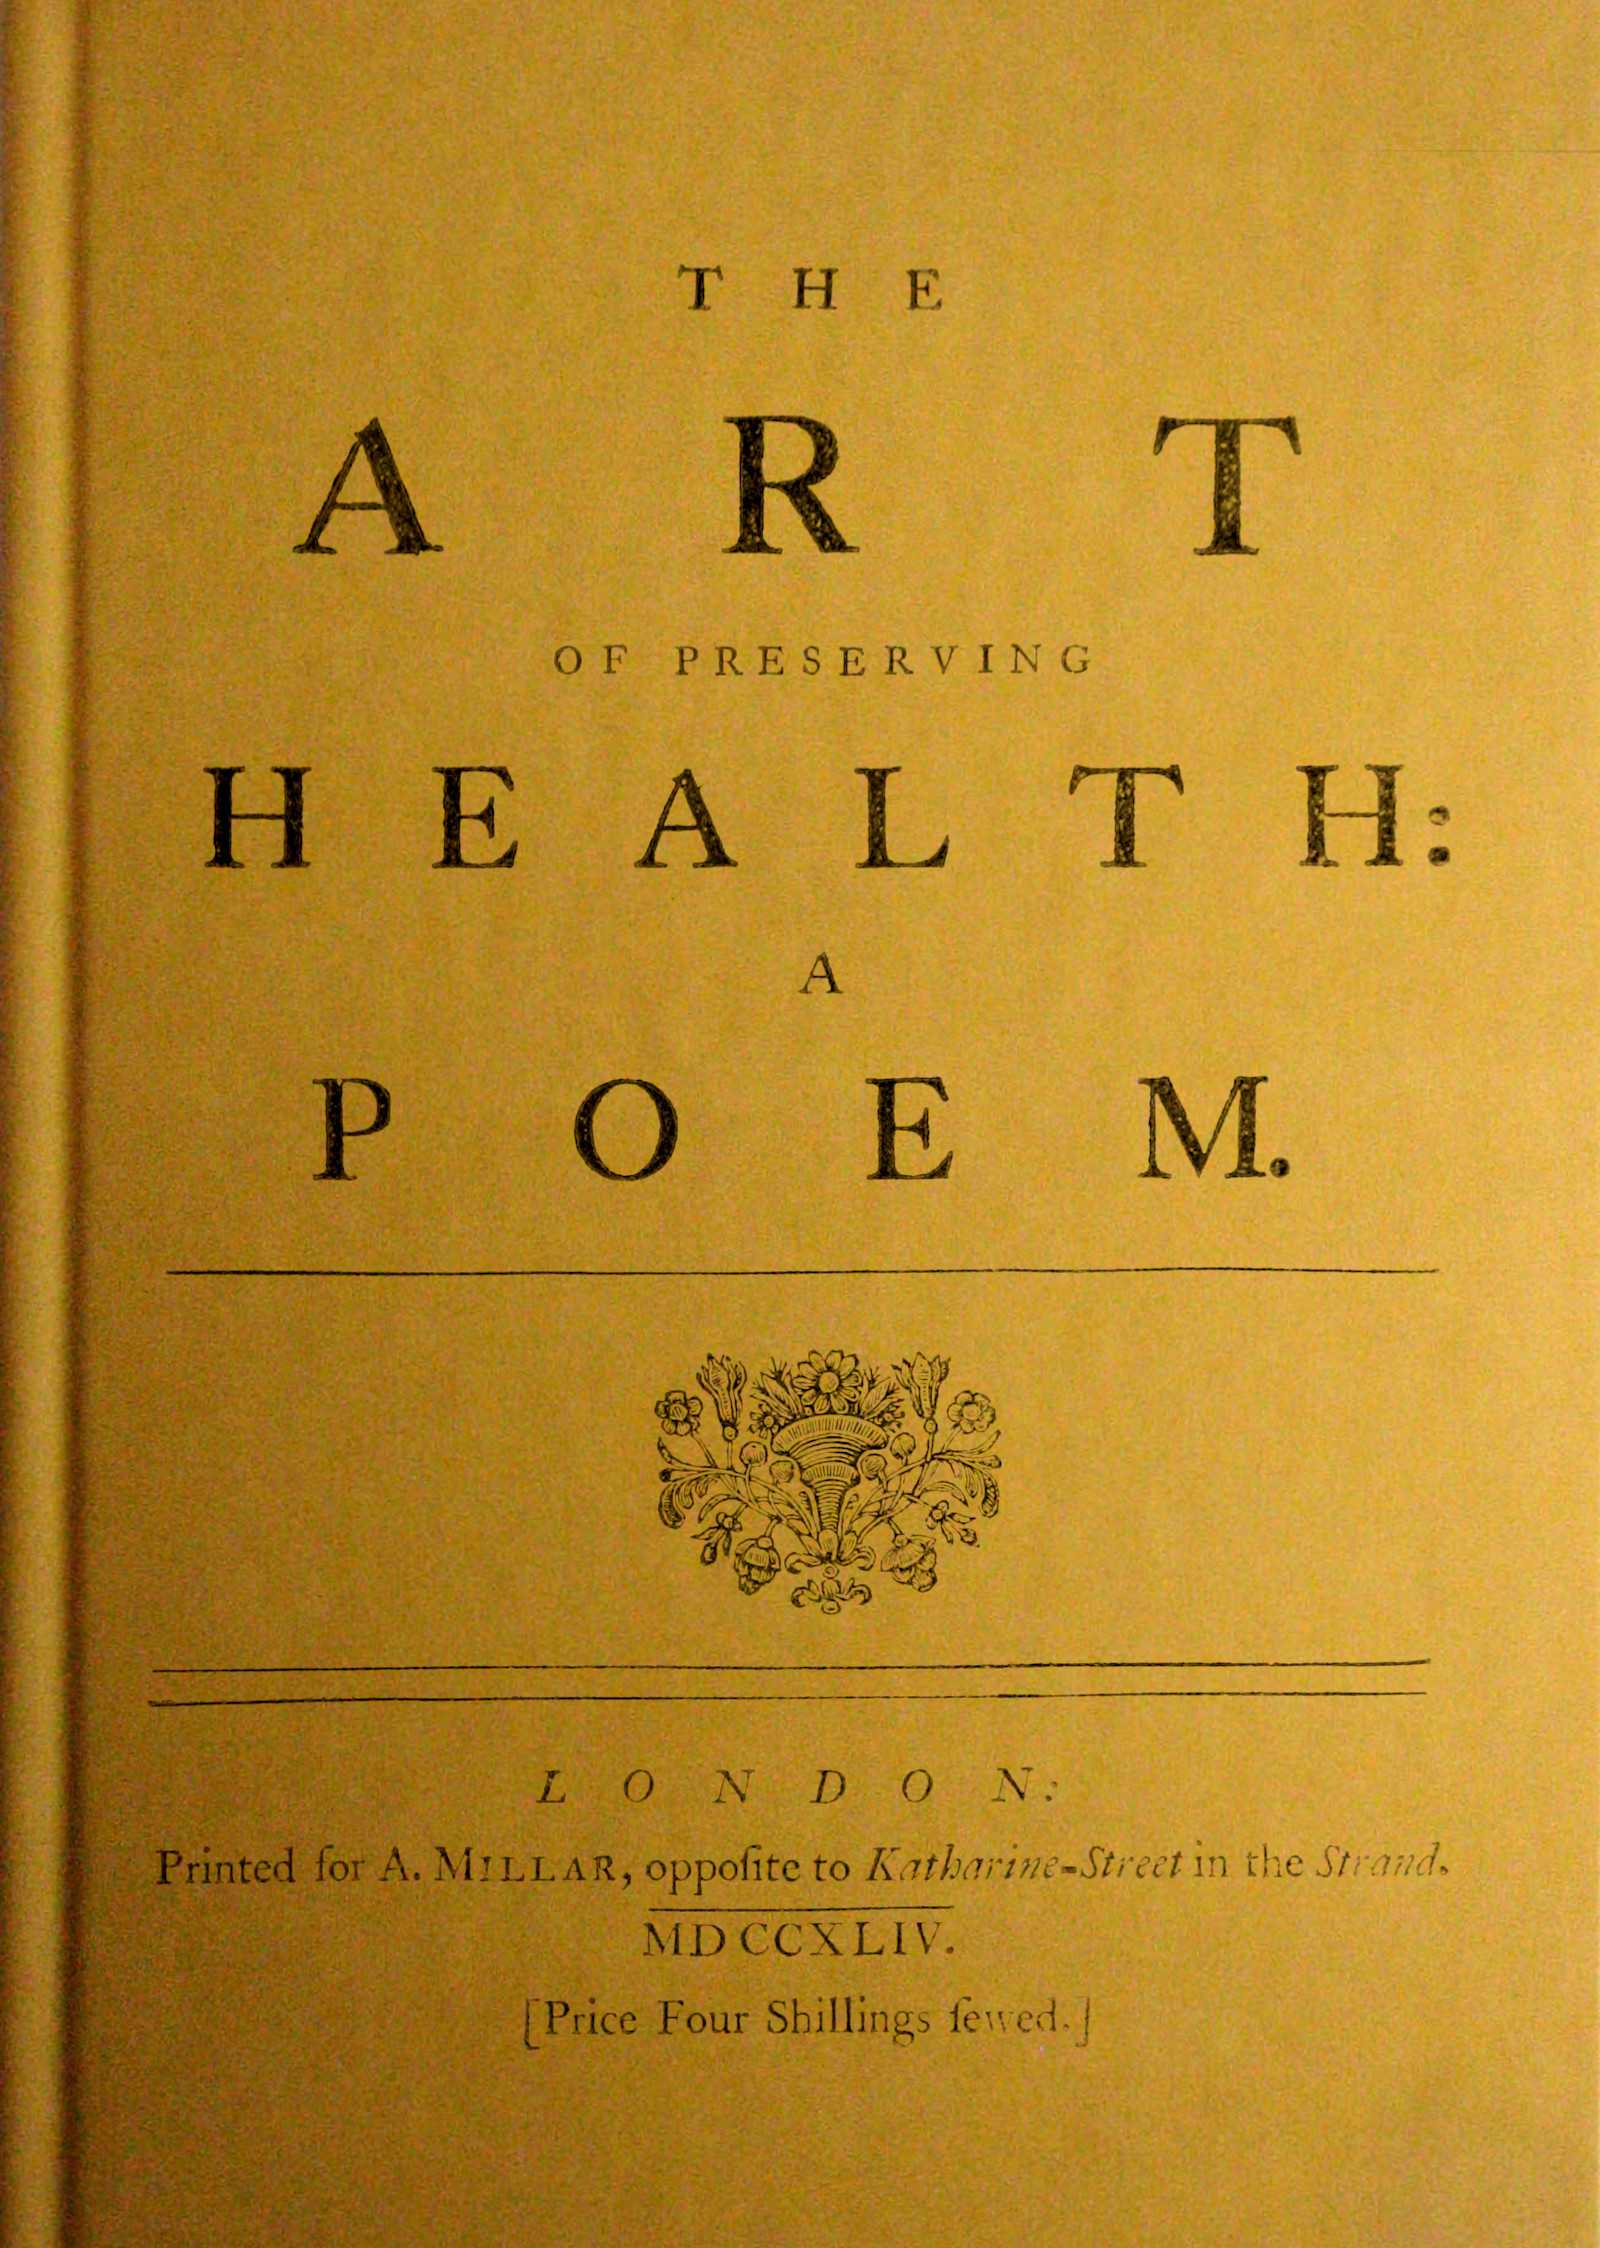 The art of preserving health: A poem